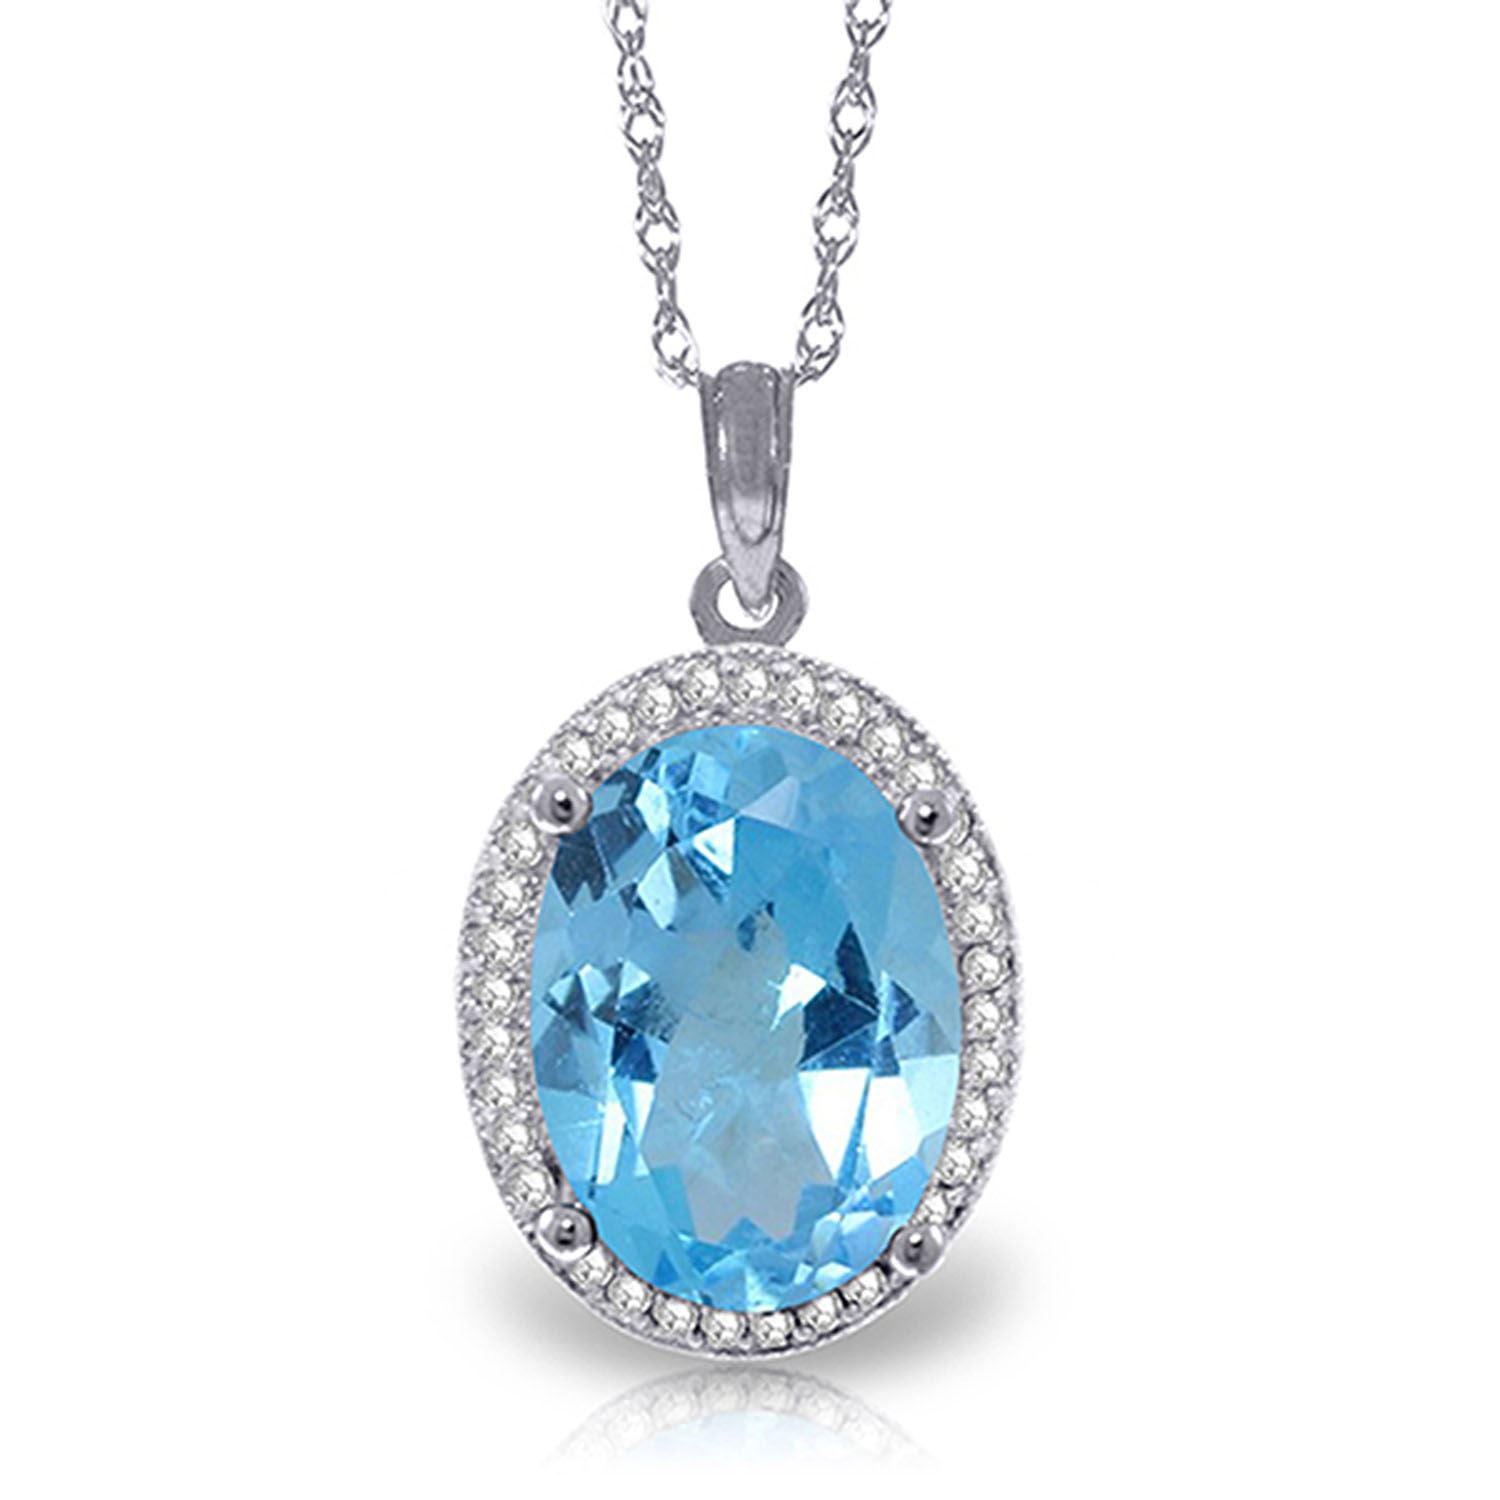 ALARRI 1.4 Carat 14K Solid White Gold Hearts Necklace Natural Blue Topaz Peridot with 20 Inch Chain Length